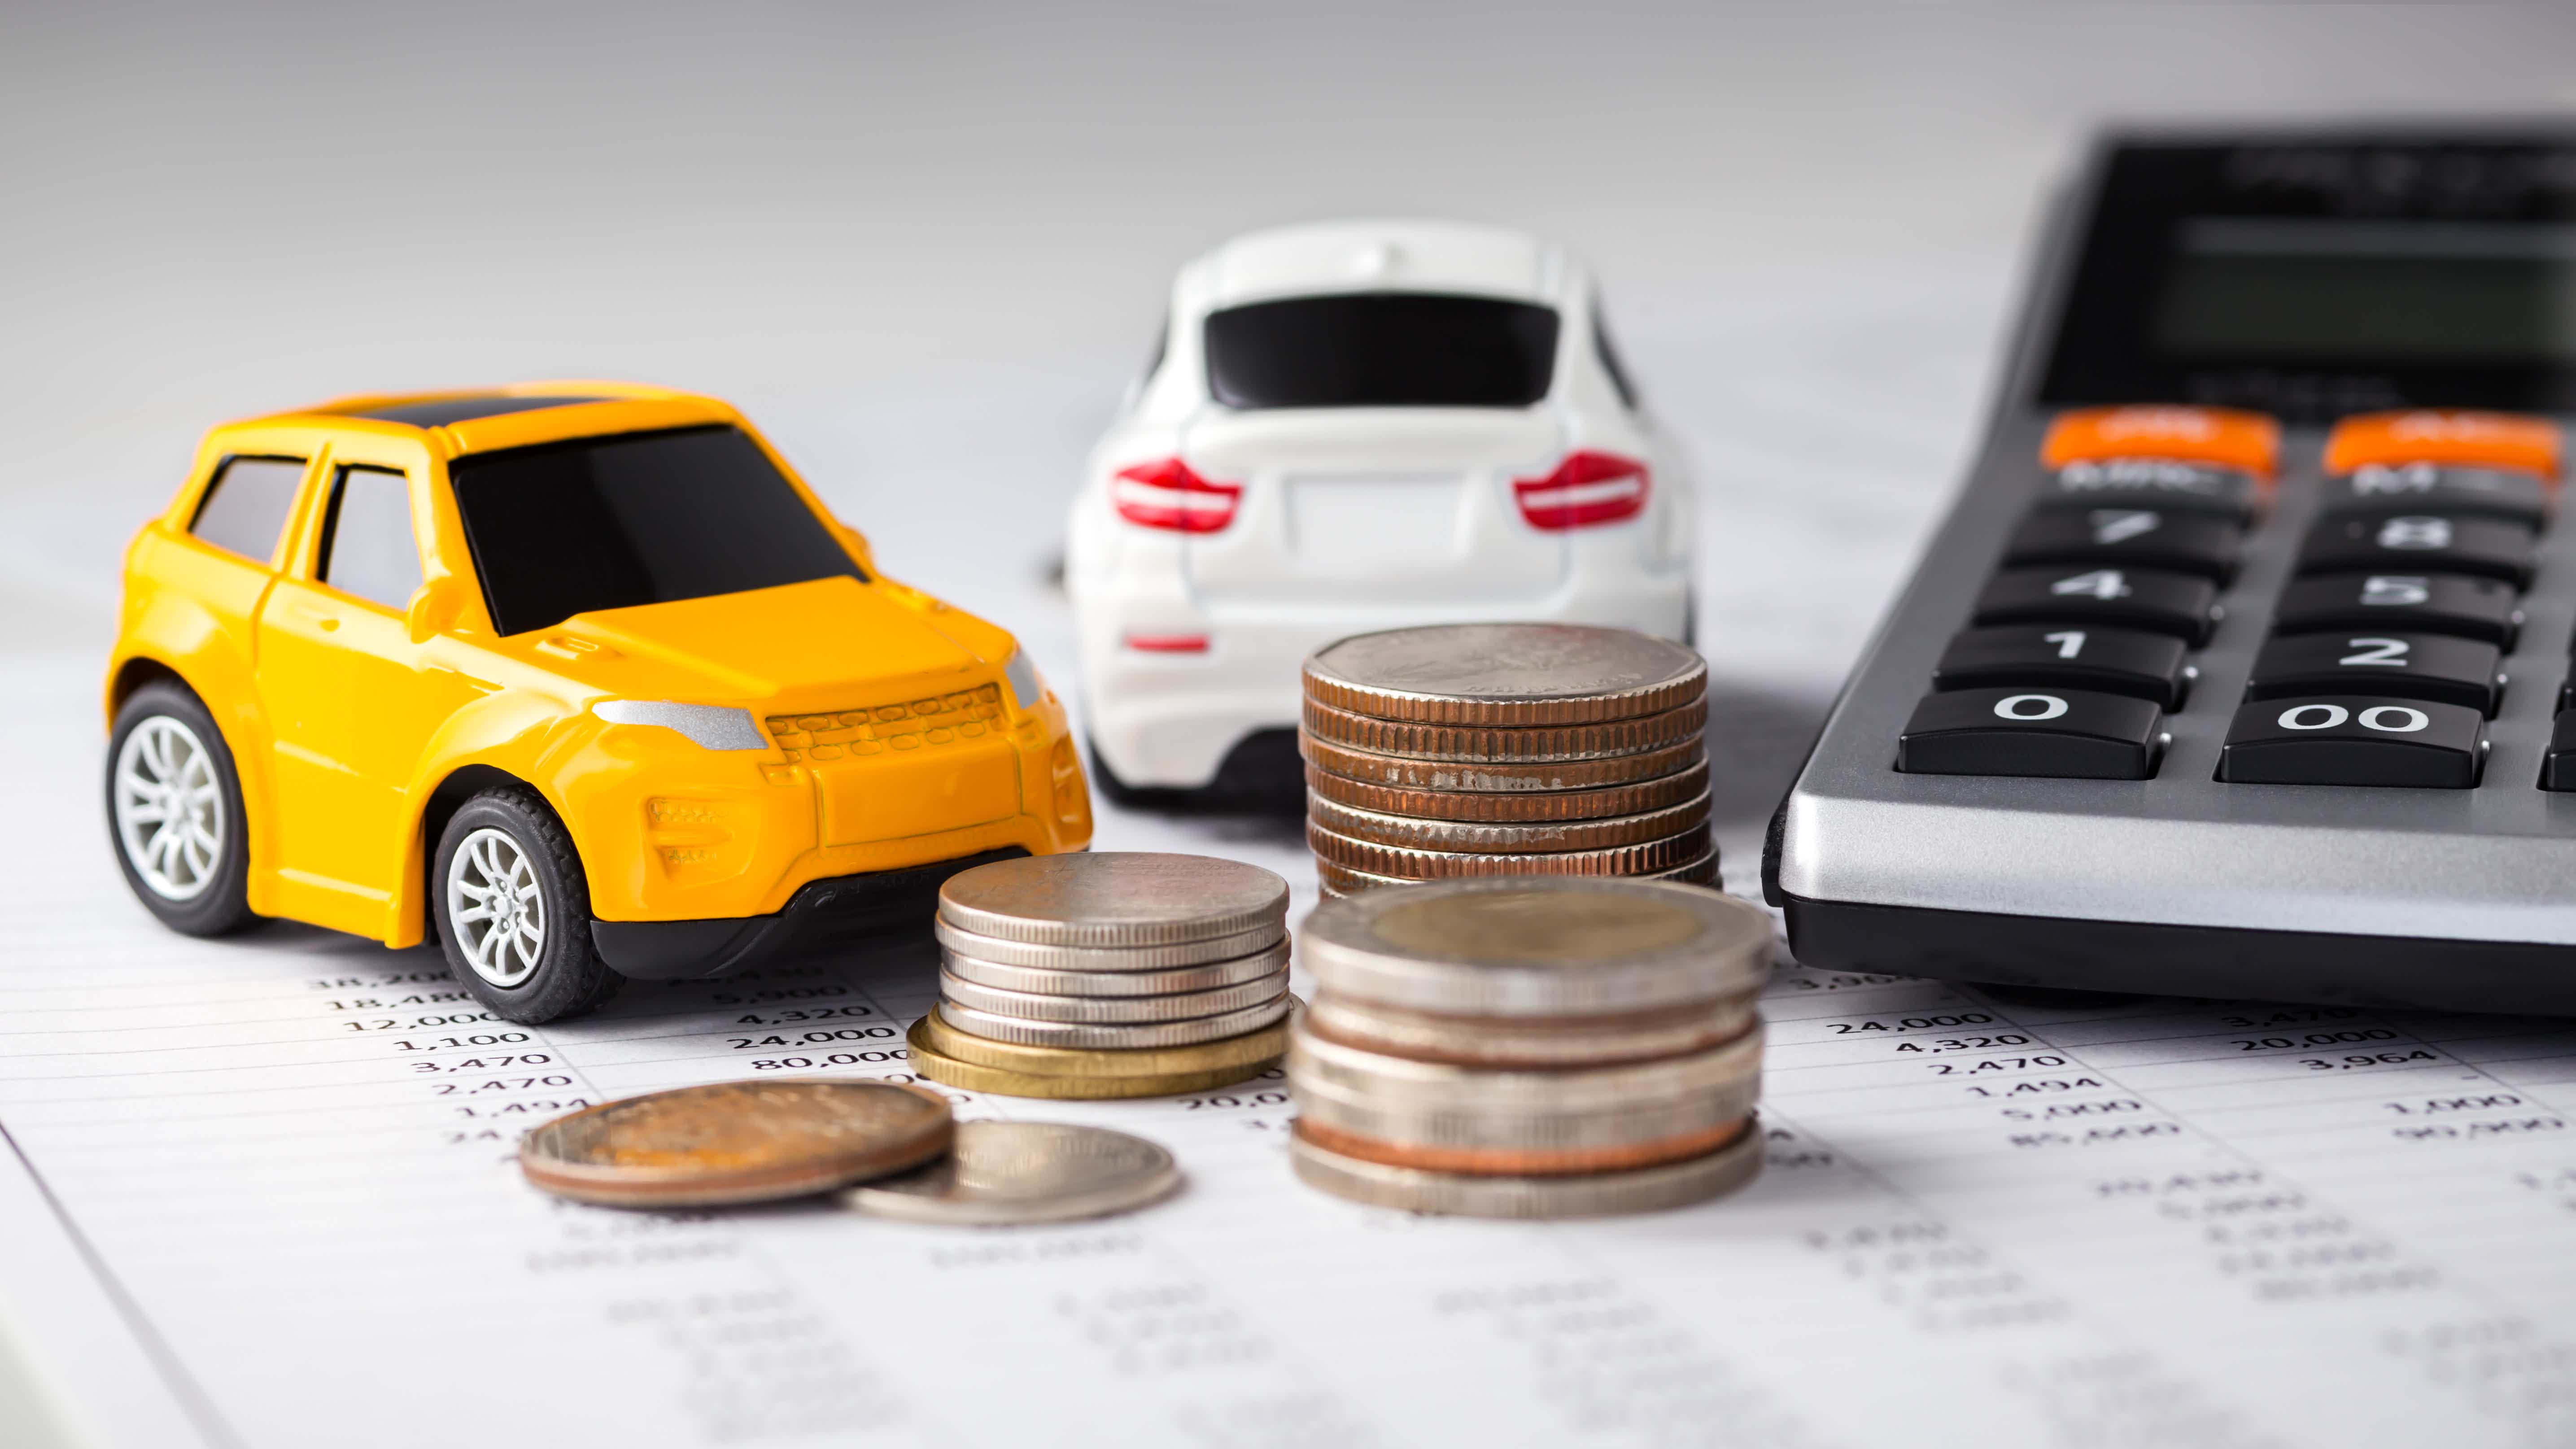 Get the money you need to buy the car you want! Source: Adobe Stock.